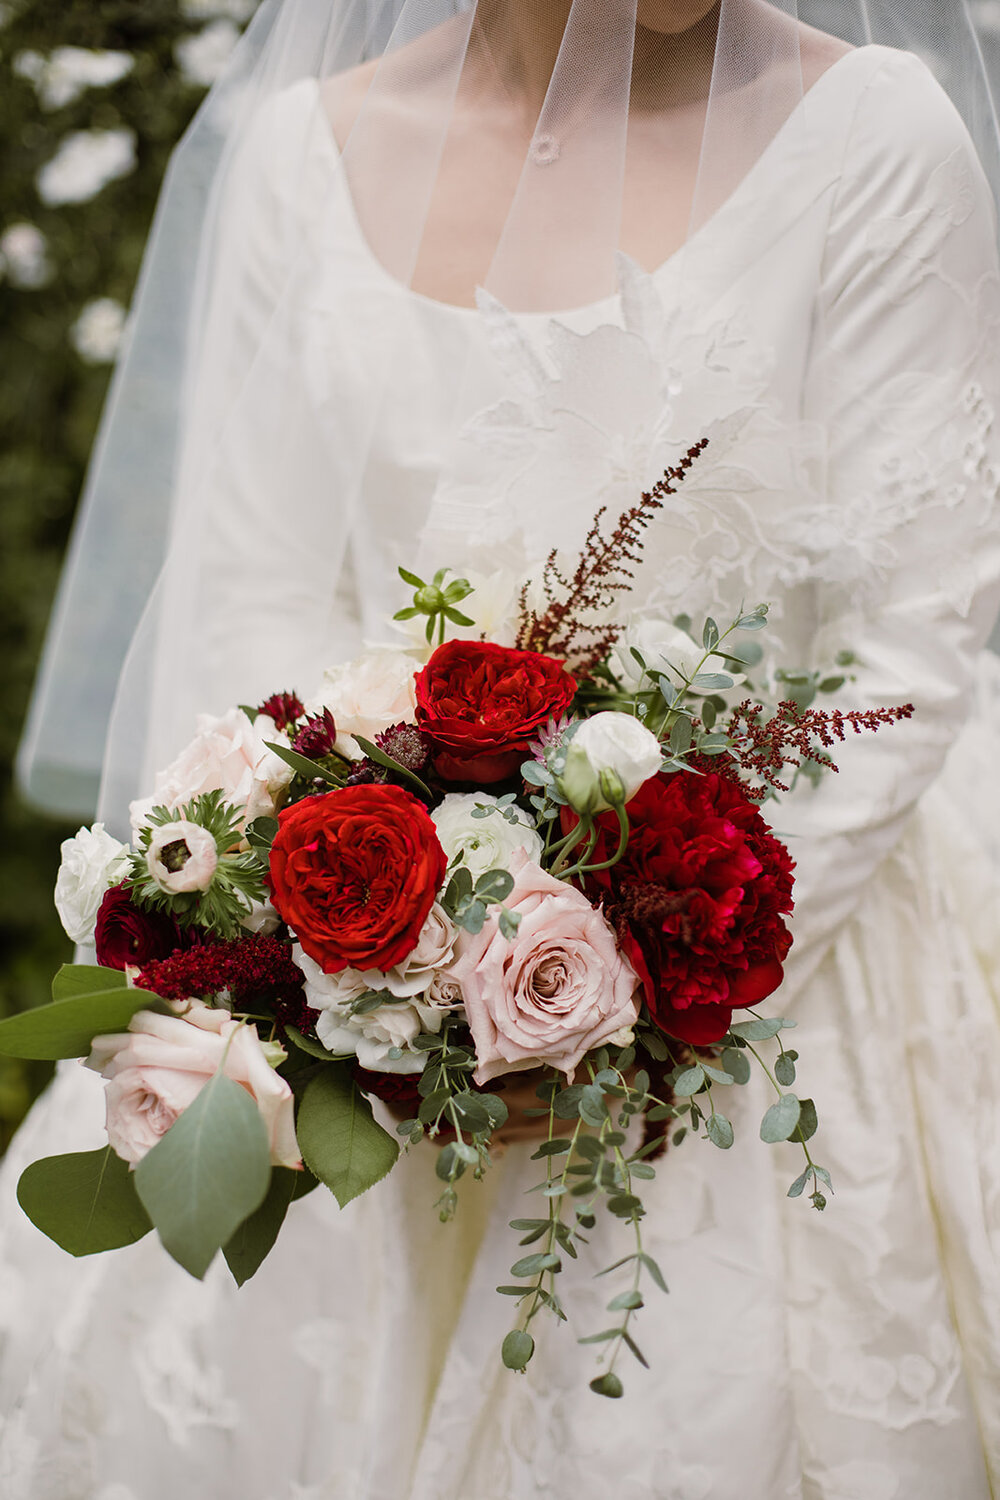  Cafe au lait dahlias and red peony wedding florals | Black tie wedding with a red tux and custom Anne Barge gown | Romantic wedding at St. Bridget and The Omni Hotel in Richmond, VA. 